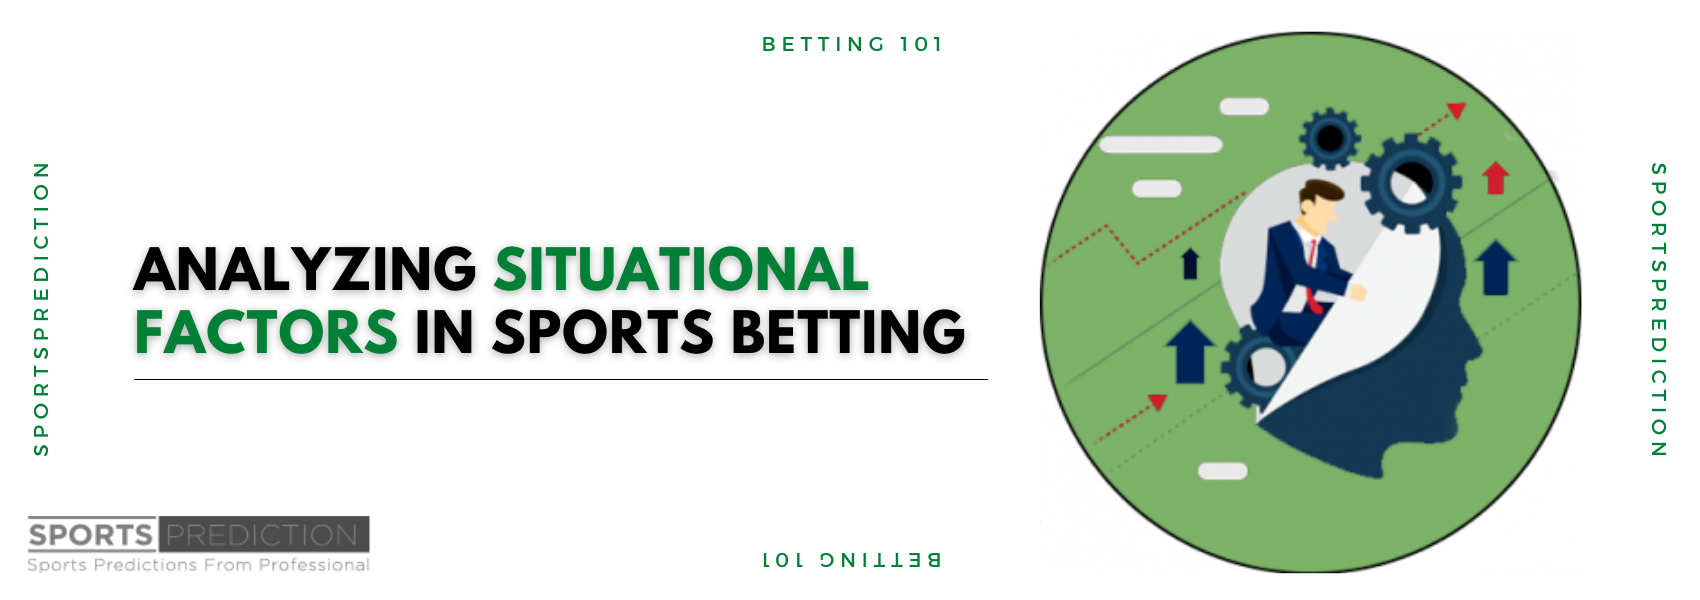 Analyzing Situational Factors In Sports Betting